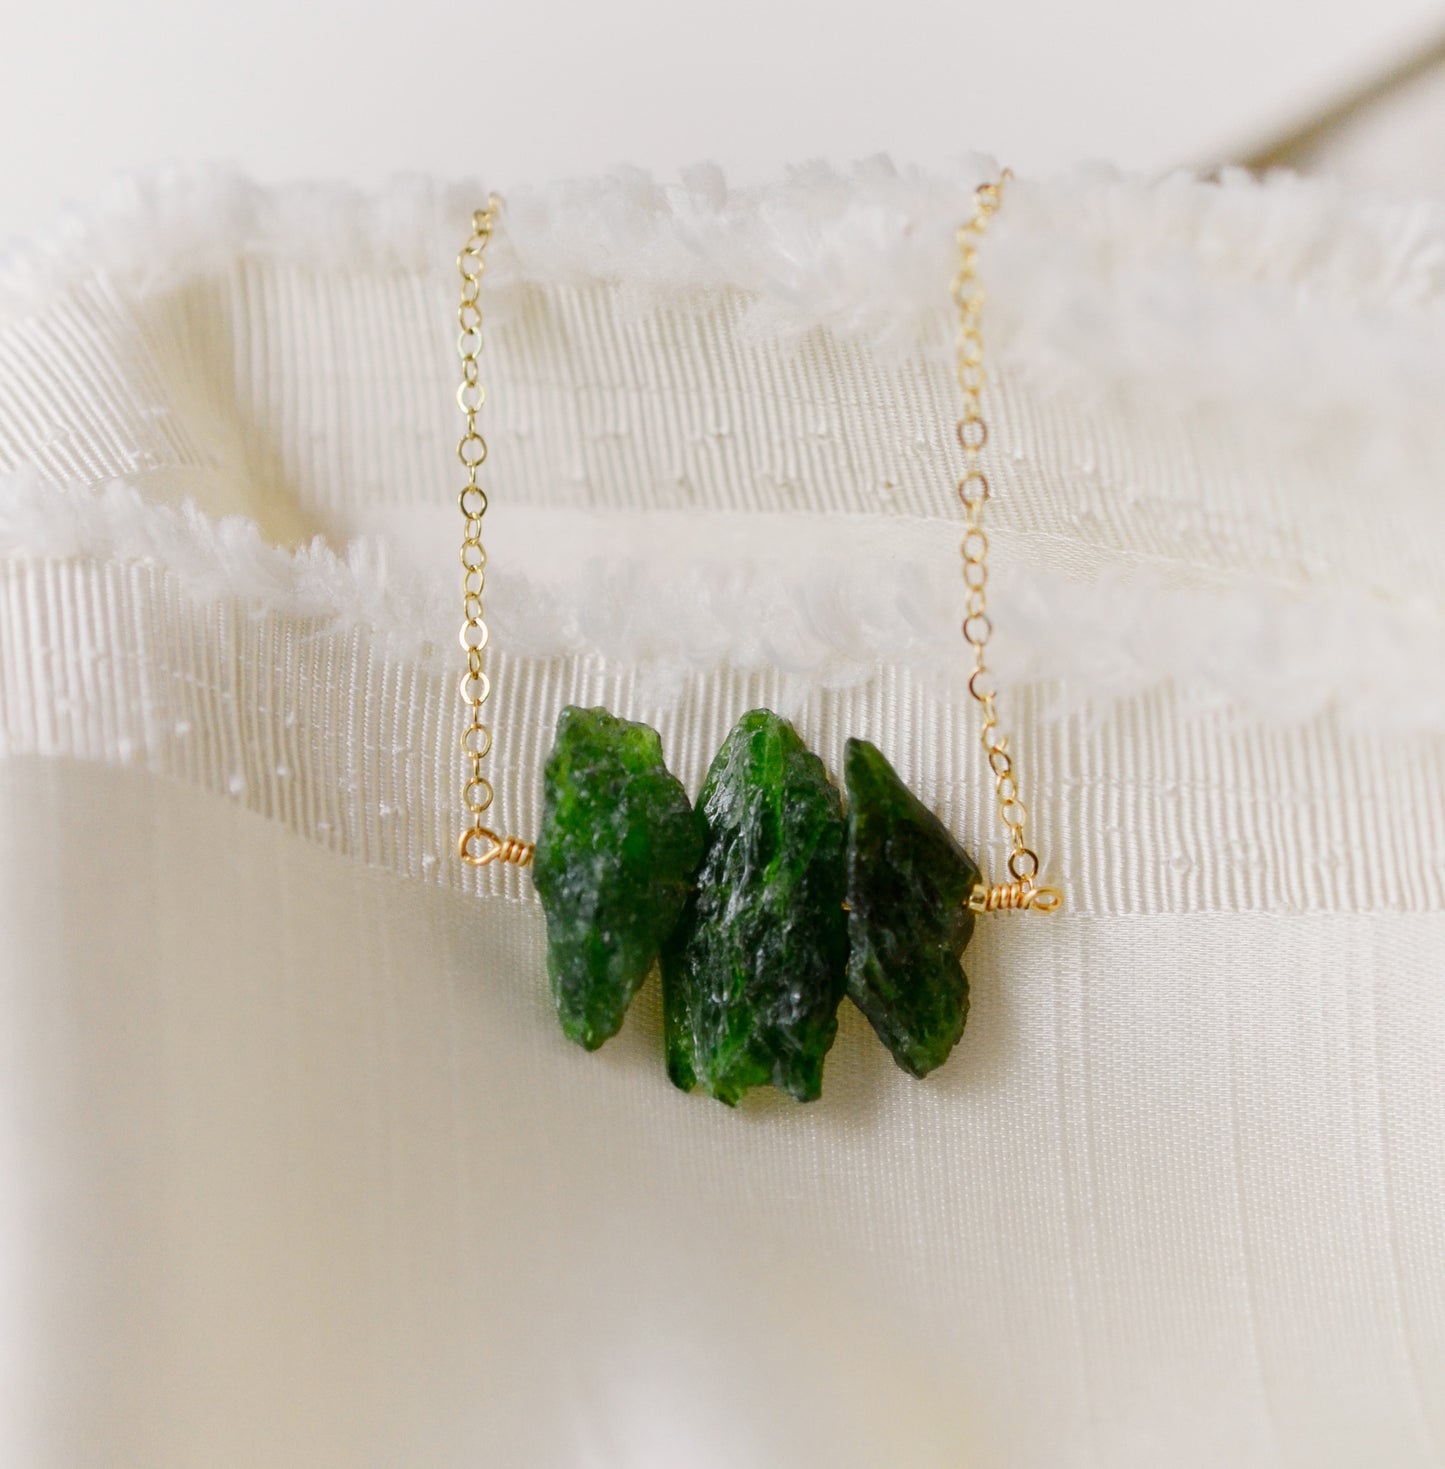 Natural green Chrome Diopside raw crystals set onto a gold filled chain.